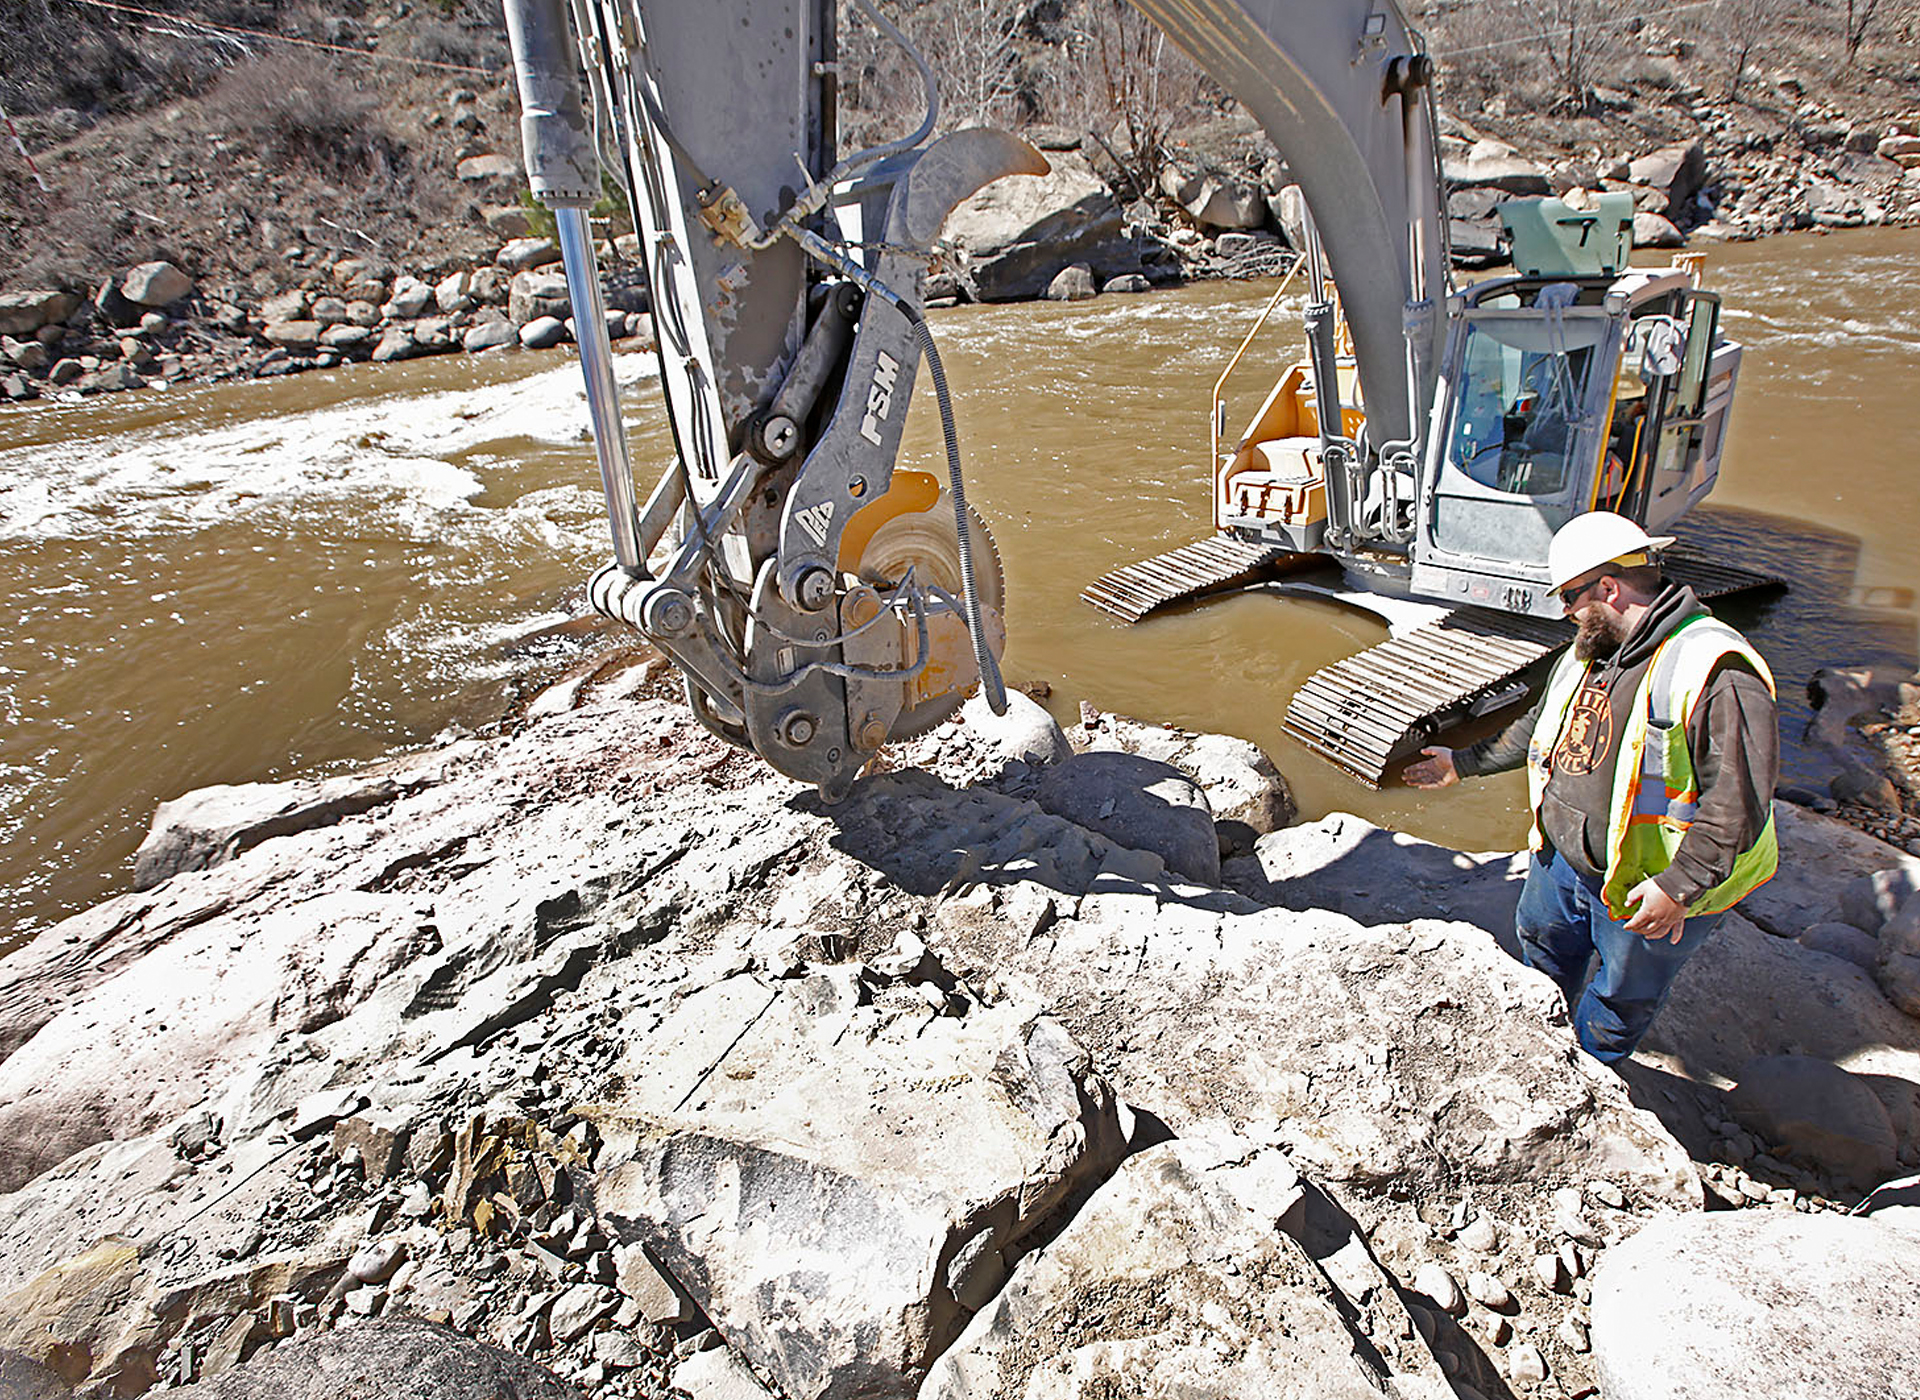 Volvo excavator saws through rock with percision at Durango Whitewater Park in Colorado